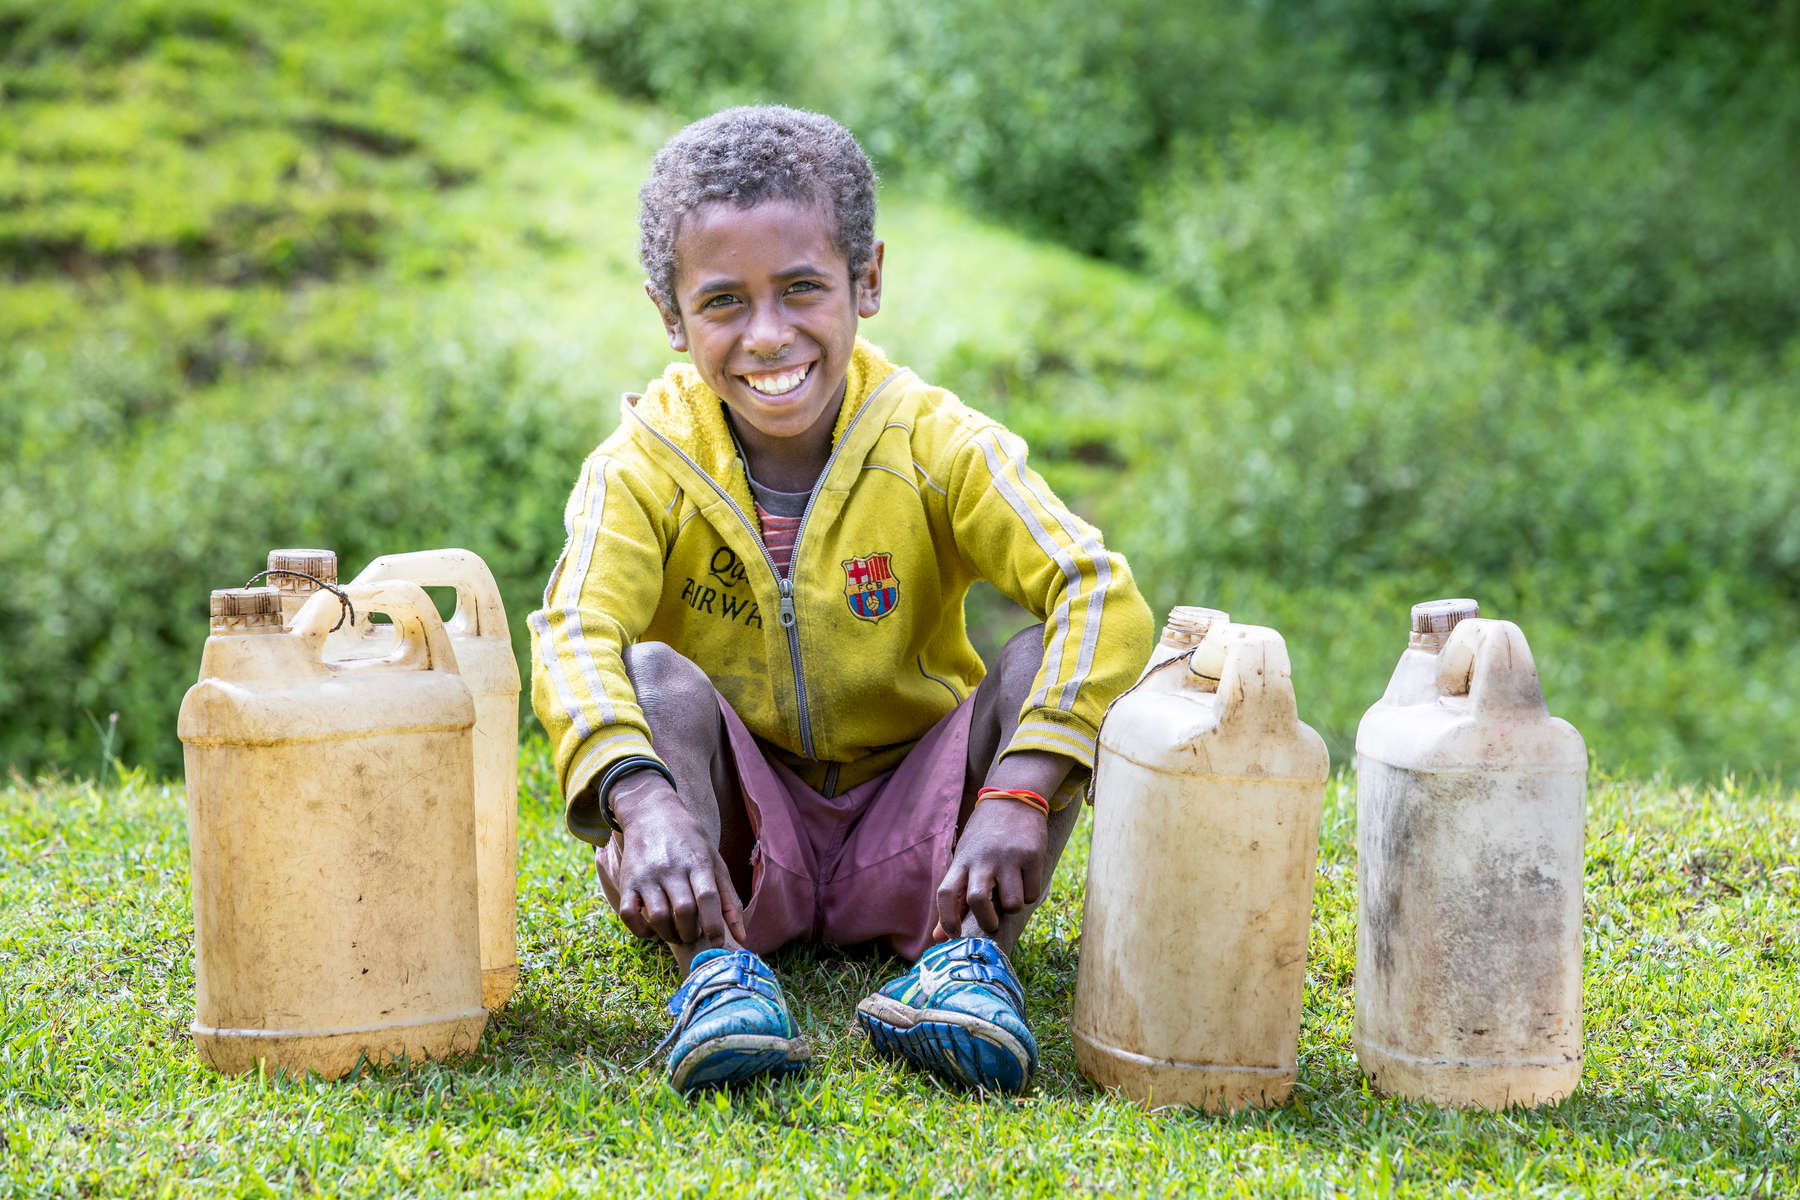 Moises Lopes, 10, rests after collecting water in the central highlands of Timor-Leste.  His village has benefitted from Mercy Corps programs. Americo Pereira, 45, is a community leader from Mulo. He says that Mercy Corps M-RED program has benefitted the village tremendously. “I’m really thankful and happy for all the things that the Mercy Corps M-RED program has done for us. Before, we didn't have any knowledge of farming techniques, but because of the Mercy Corps intervention, now we understand and know how to use techniques to make sure that we have a good plantation and a good harvest.”Farming in Timor-Leste depends on the dry and rainy seasons. Because of climate change, the dry seasons are longer and the rains are harder to predict. That leaves farmers with less to feed their families.Hunger is a serious problem in Timor-Leste, where most families in the rural mountains depend on farming to survive. Mercy Corps is helping farmers manage their own farmers groups, where local communities pull together rather than work alone.